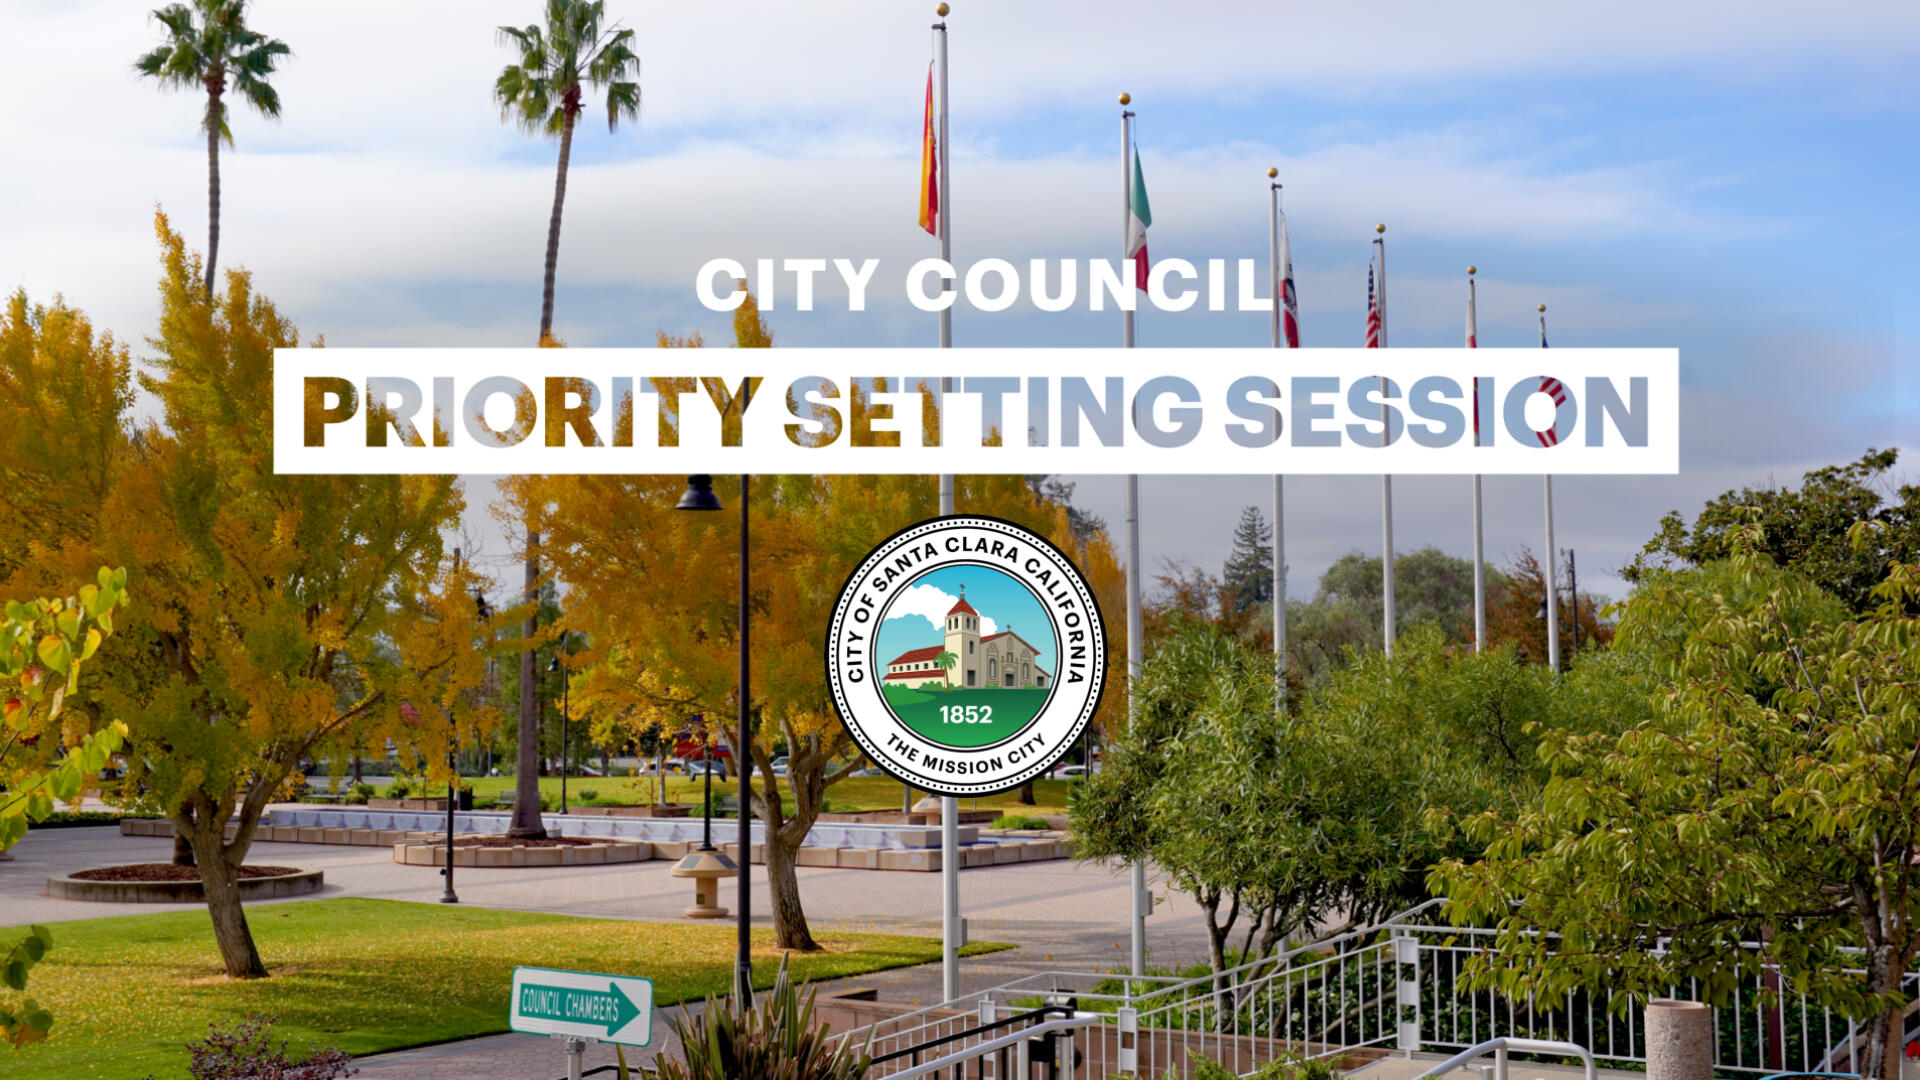 CANCELLED: City Council Priority Setting Session March 1 2022 (City